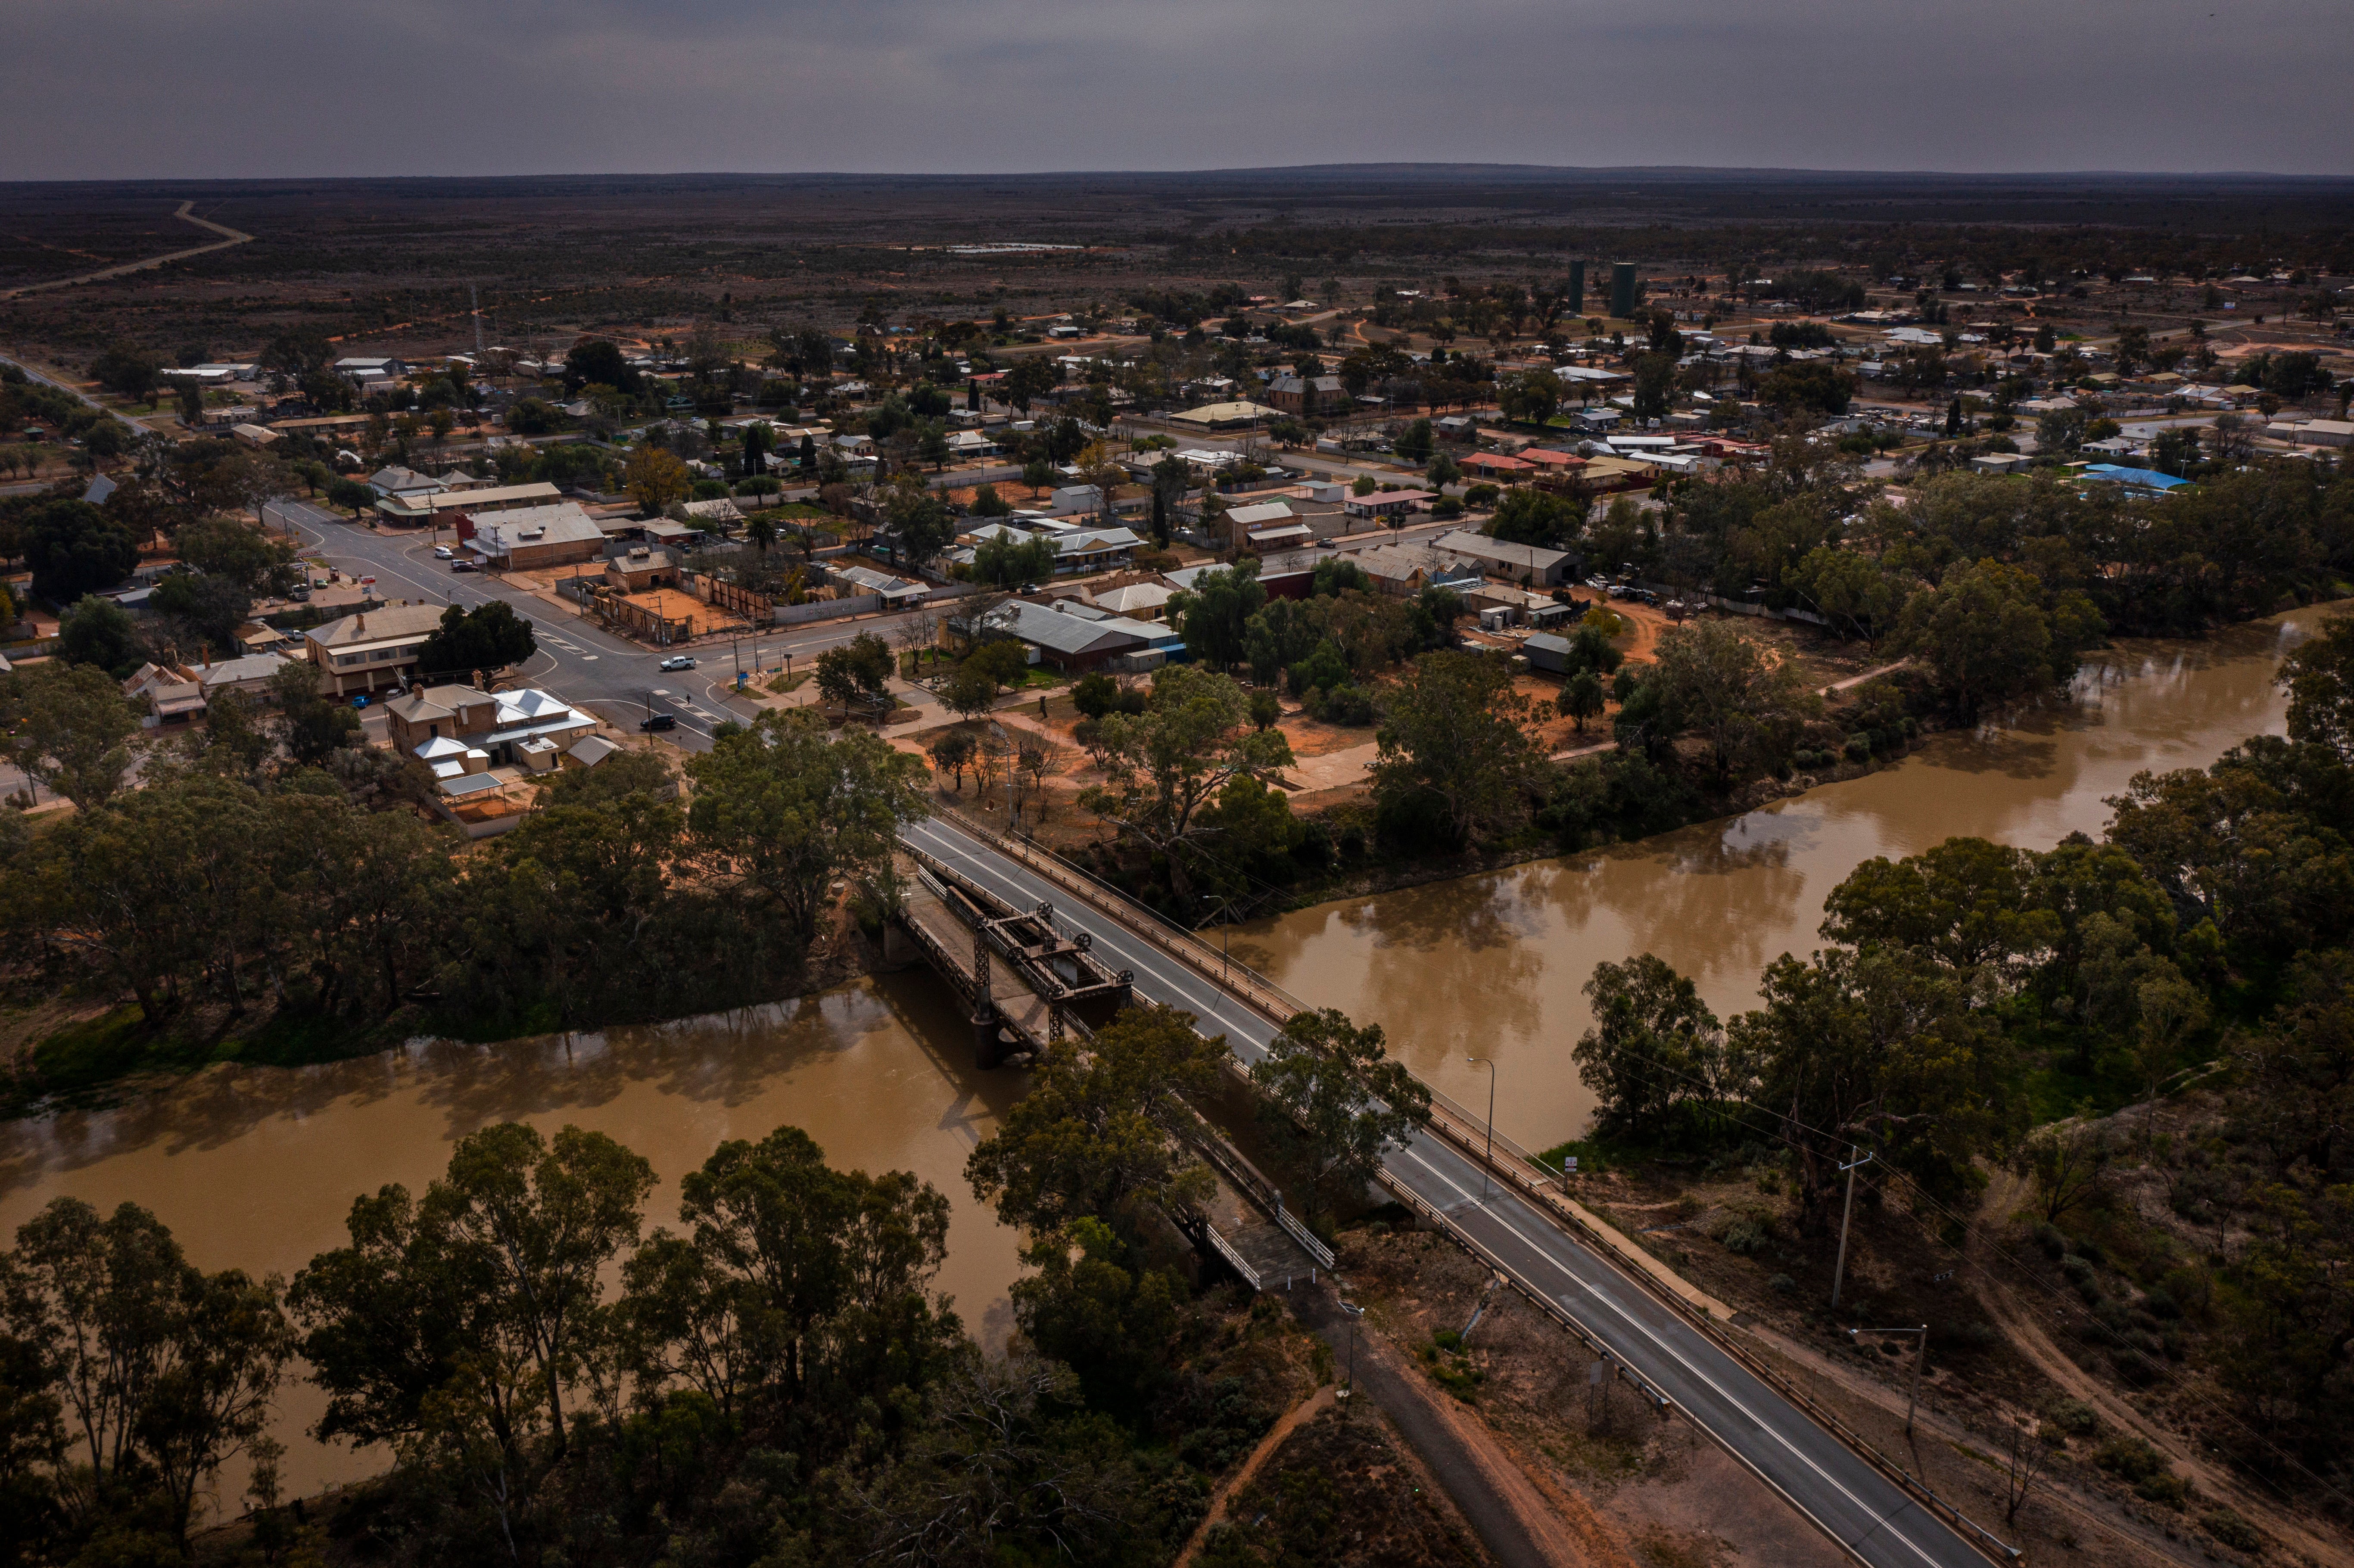 Wilcannia sits on the Darling River in far western New South Wales